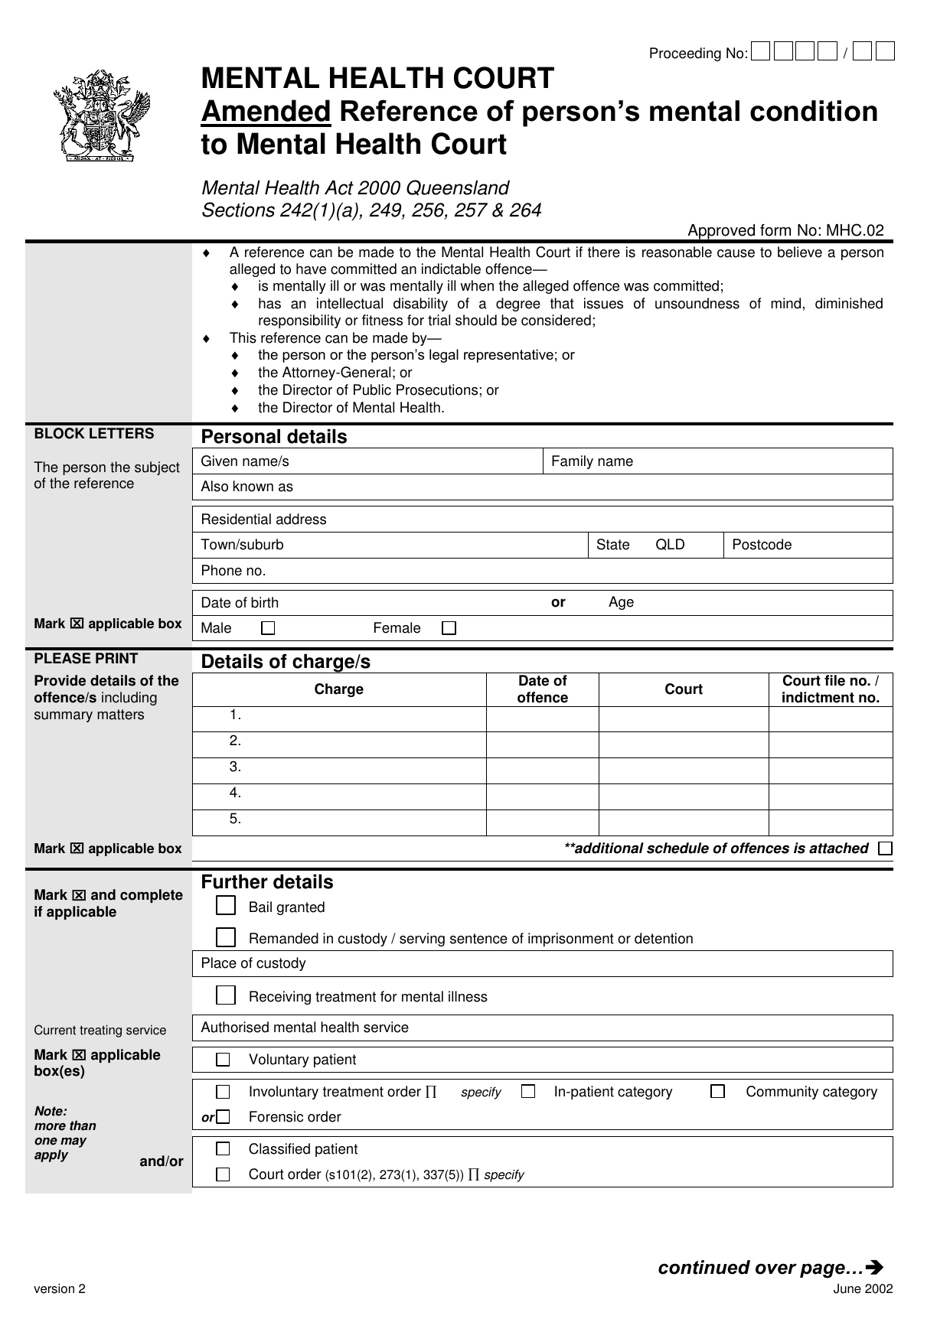 Form 02 Reference of Persons Mental Condition to Mental Health Court - Queensland, Australia, Page 1